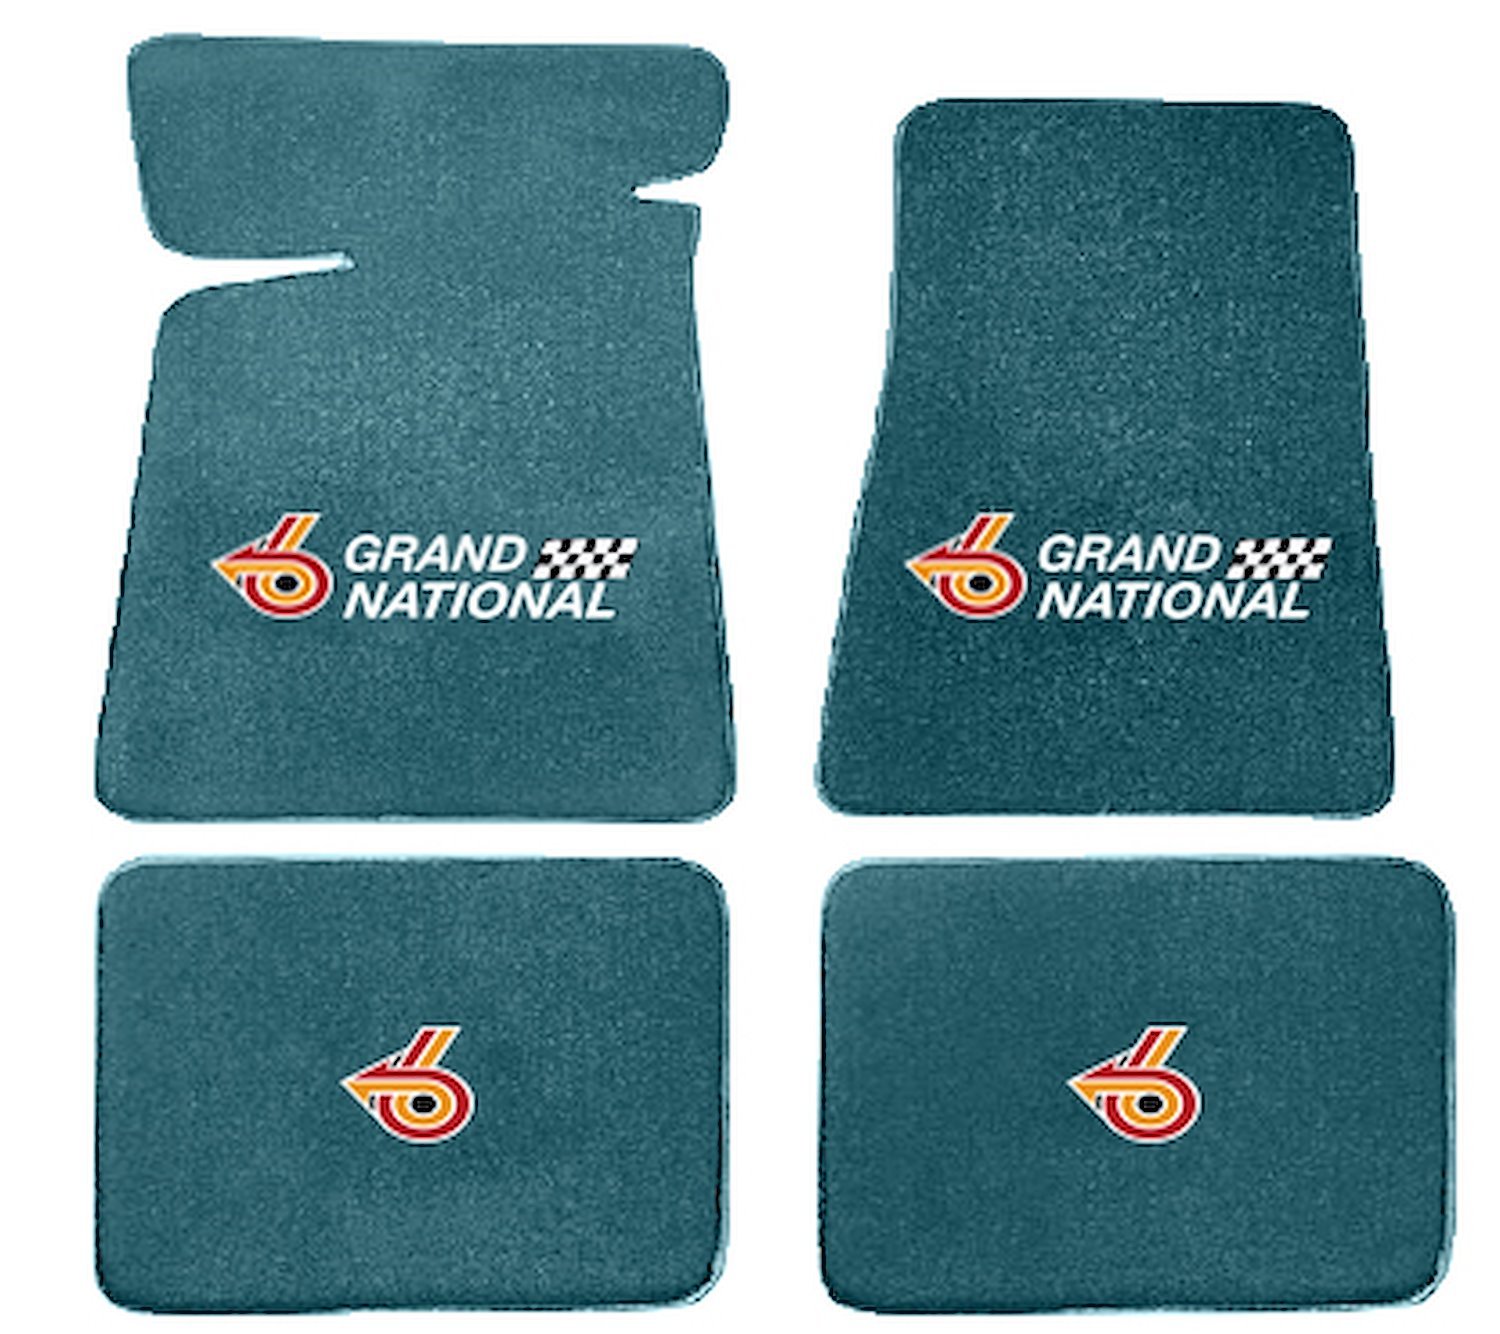 Molded Cut Pile Floor Mats for 1984-1987 Buick Regal Grand National [4-Piece, W/Grand National Logo, Blue]